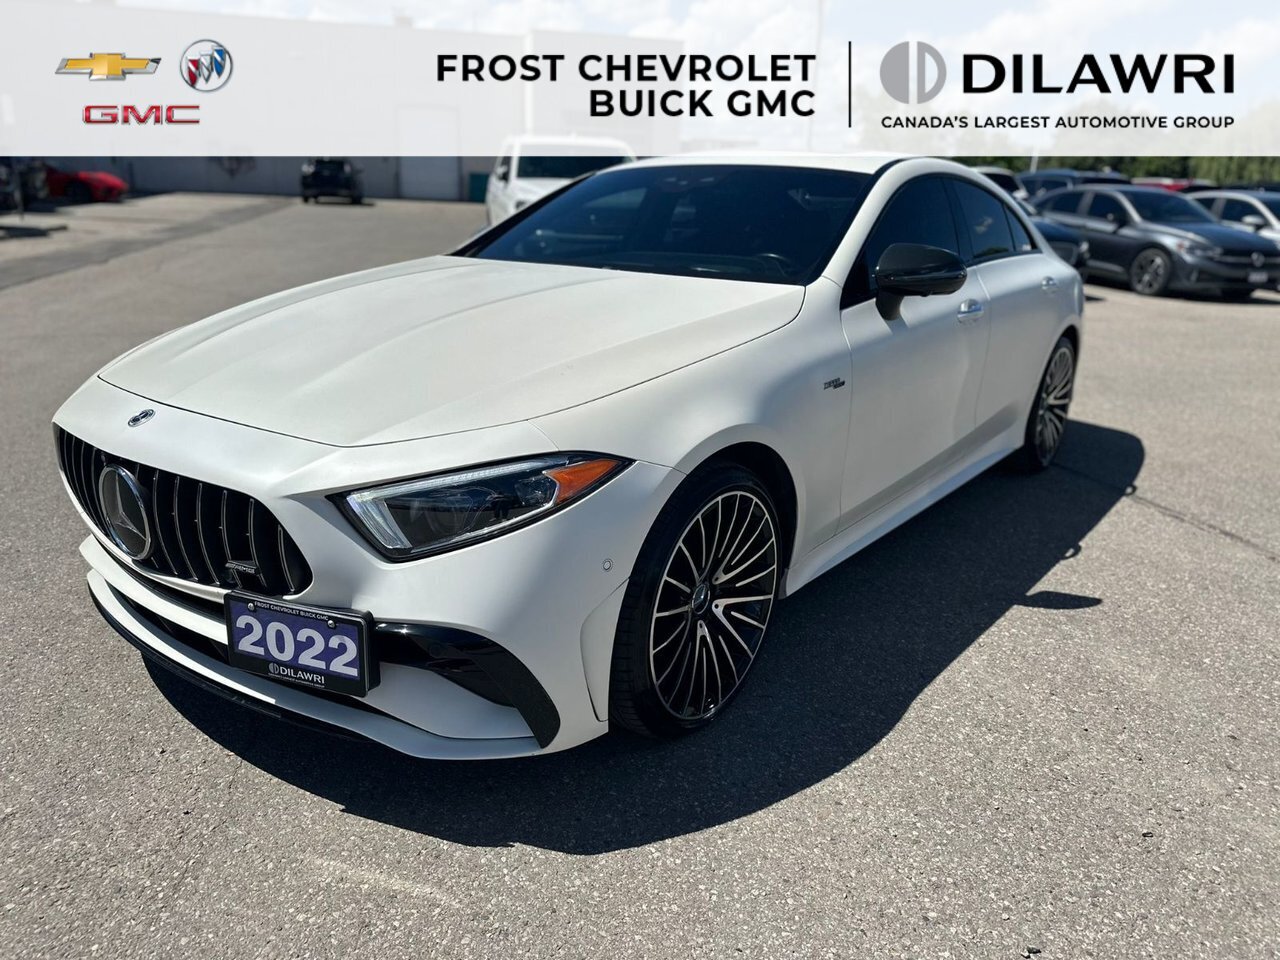 2022 Mercedes-Benz CLS53 AMG 4MATIC+ Coupe Factory Matte White|Adaptive Cruise|